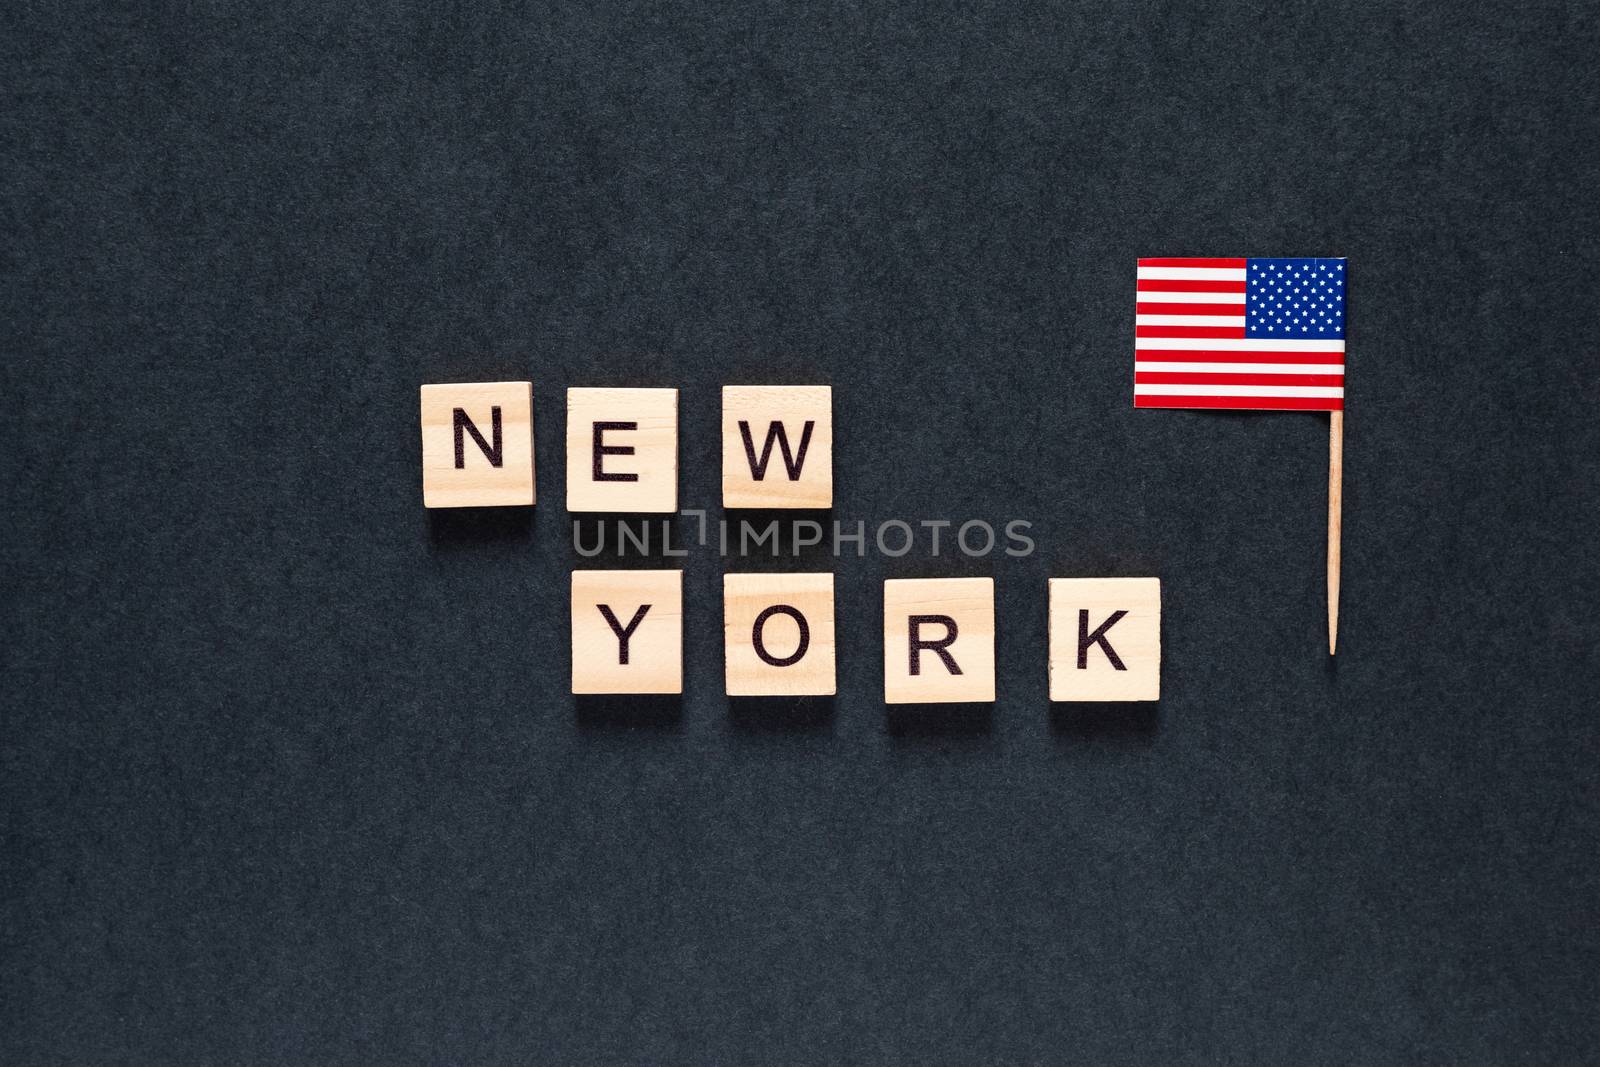 new york inscription on a black background with the American flag. Blackout tuesday. Black lives matter, blackout tuesday 2020 concept. unrest. rallies. brigandage. marauders. looting. USA